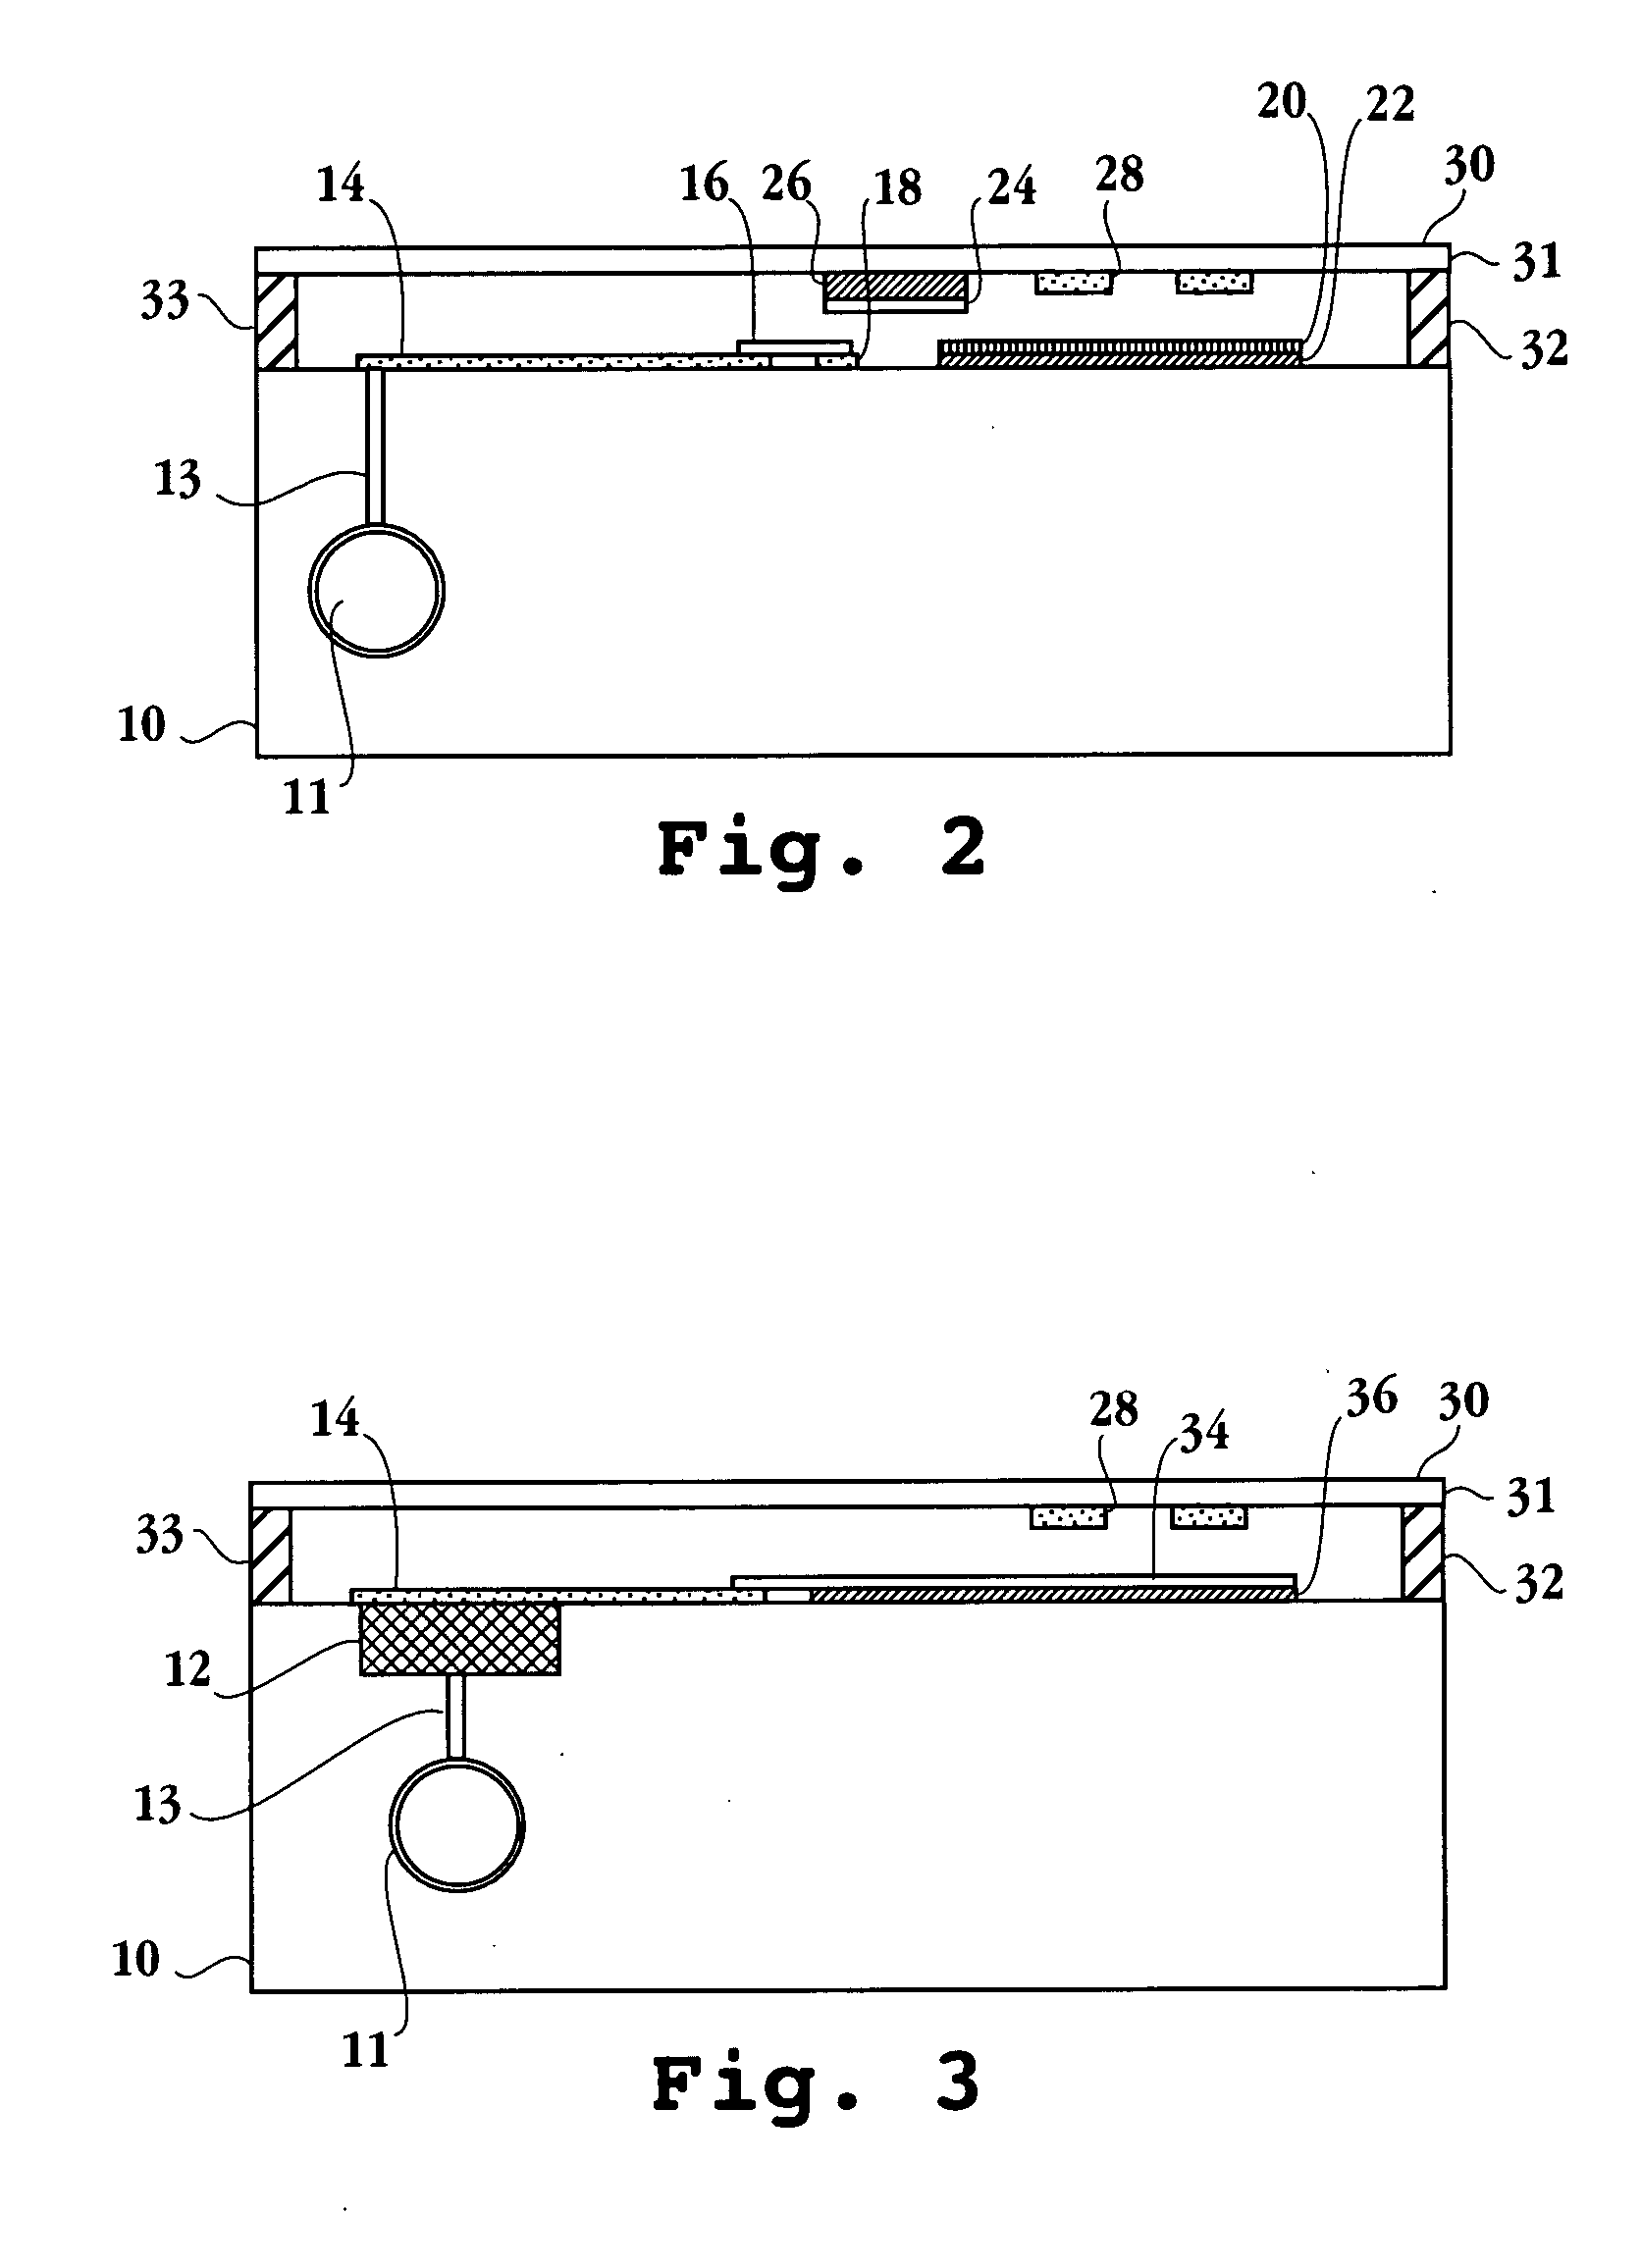 Assay system and method for direct measurement of LDL cholesterol